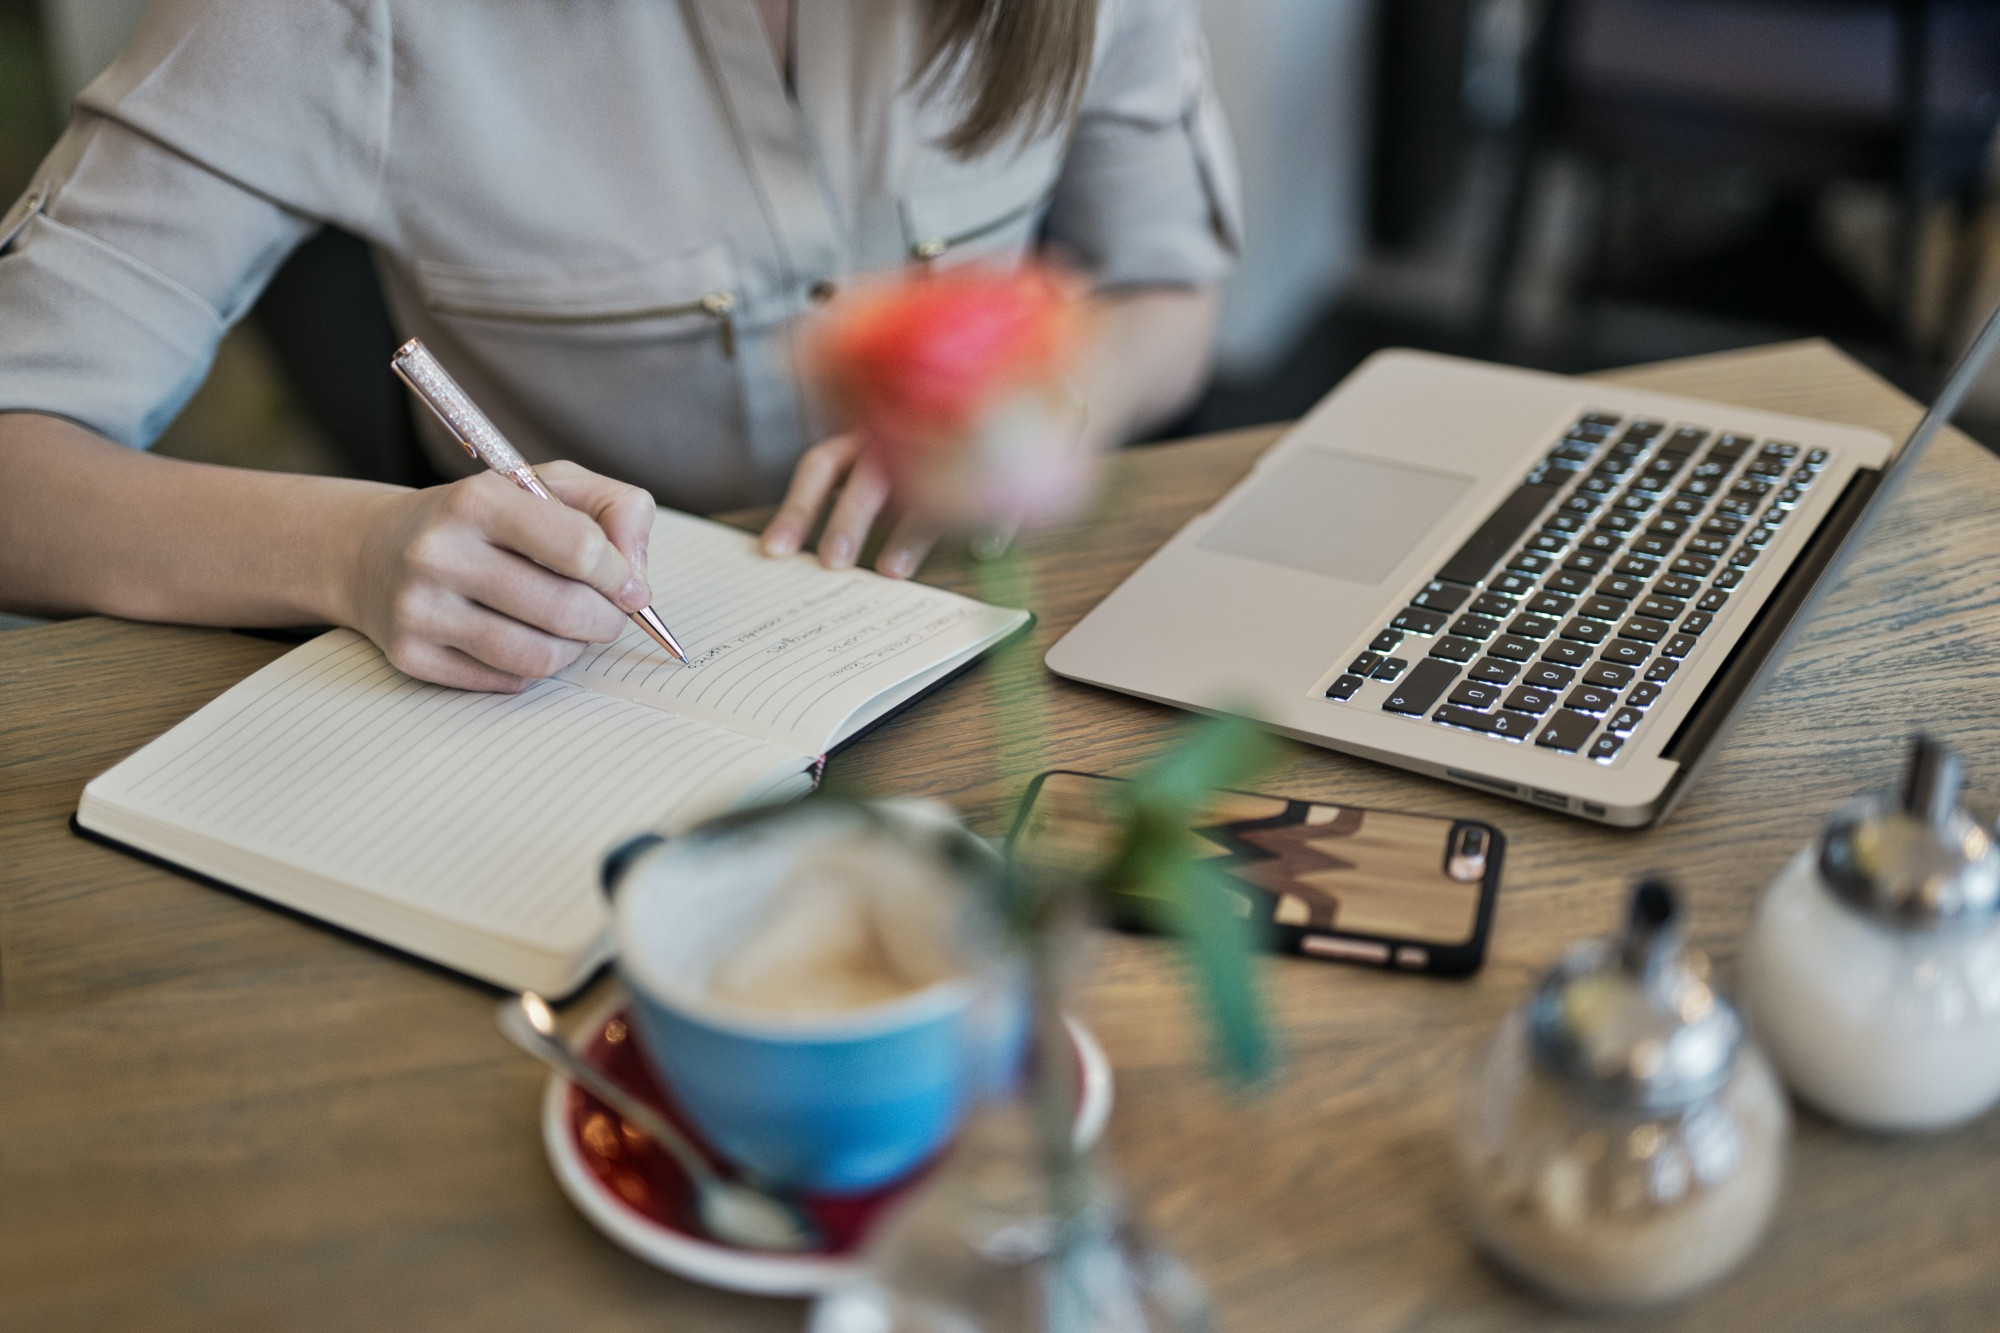 The photo is correlated with the Technical Assistance section of the website and features an individual seated at a table, actively engaged in their work. They are captured writing in a notebook while an open laptop sits nearby. On the table, a coffee mug and a blurred flower add subtle elements to the scene.